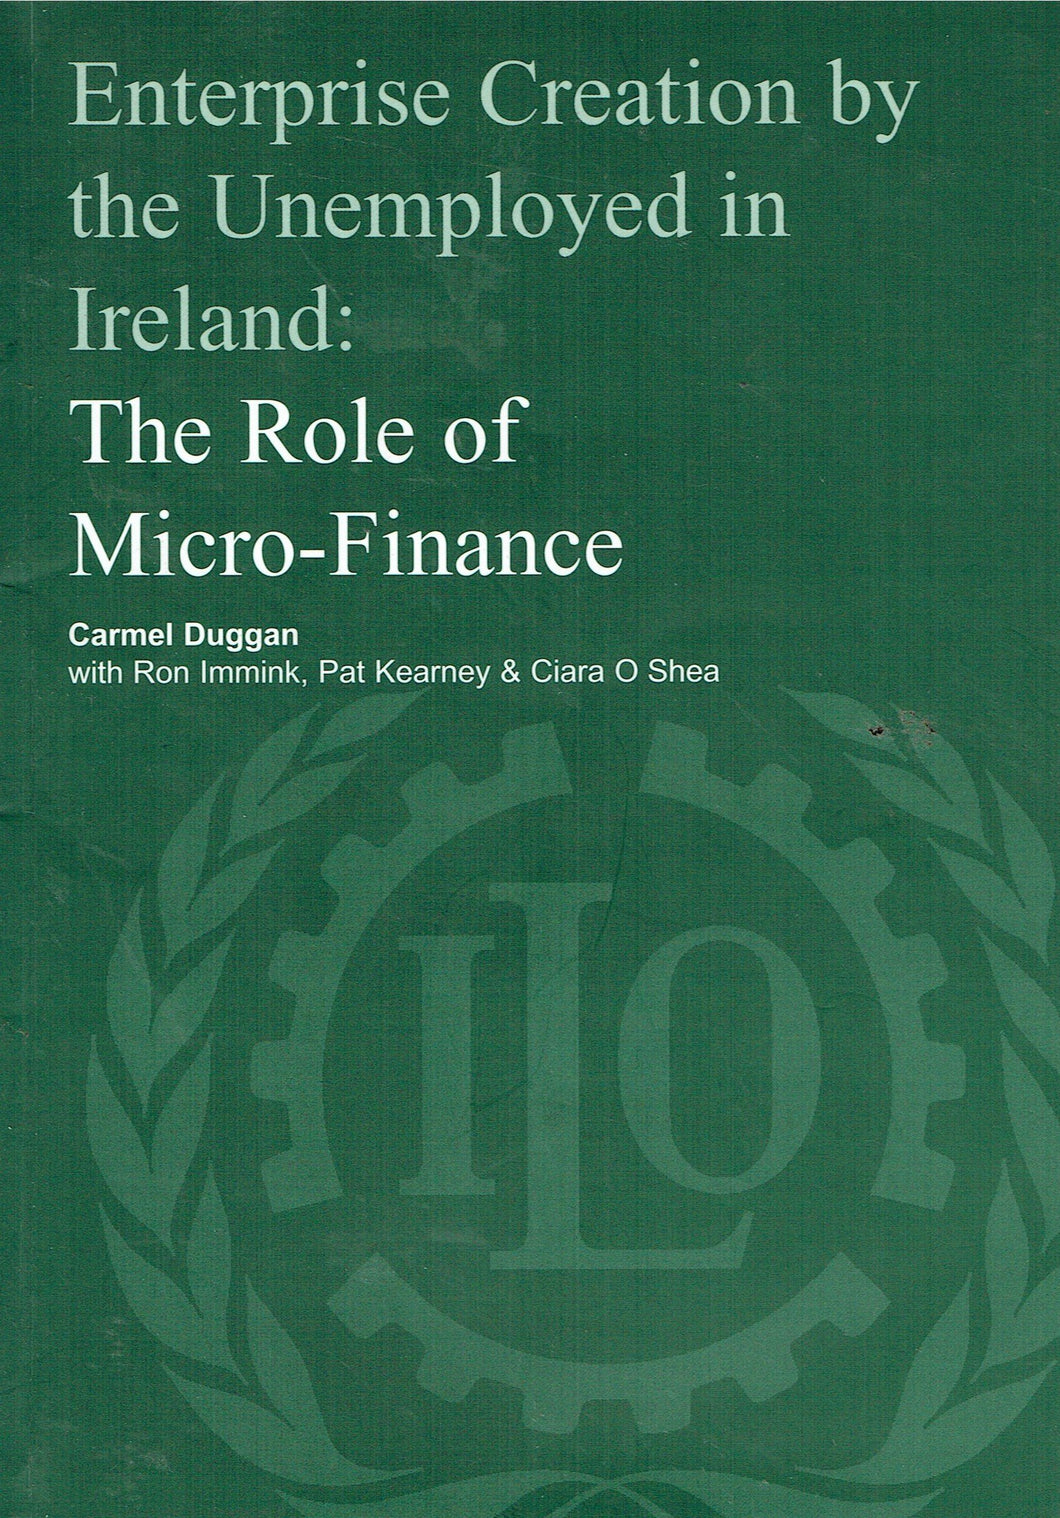 Enterprise Creation by the Unemployed in Ireland: The Role of Micro-Finance